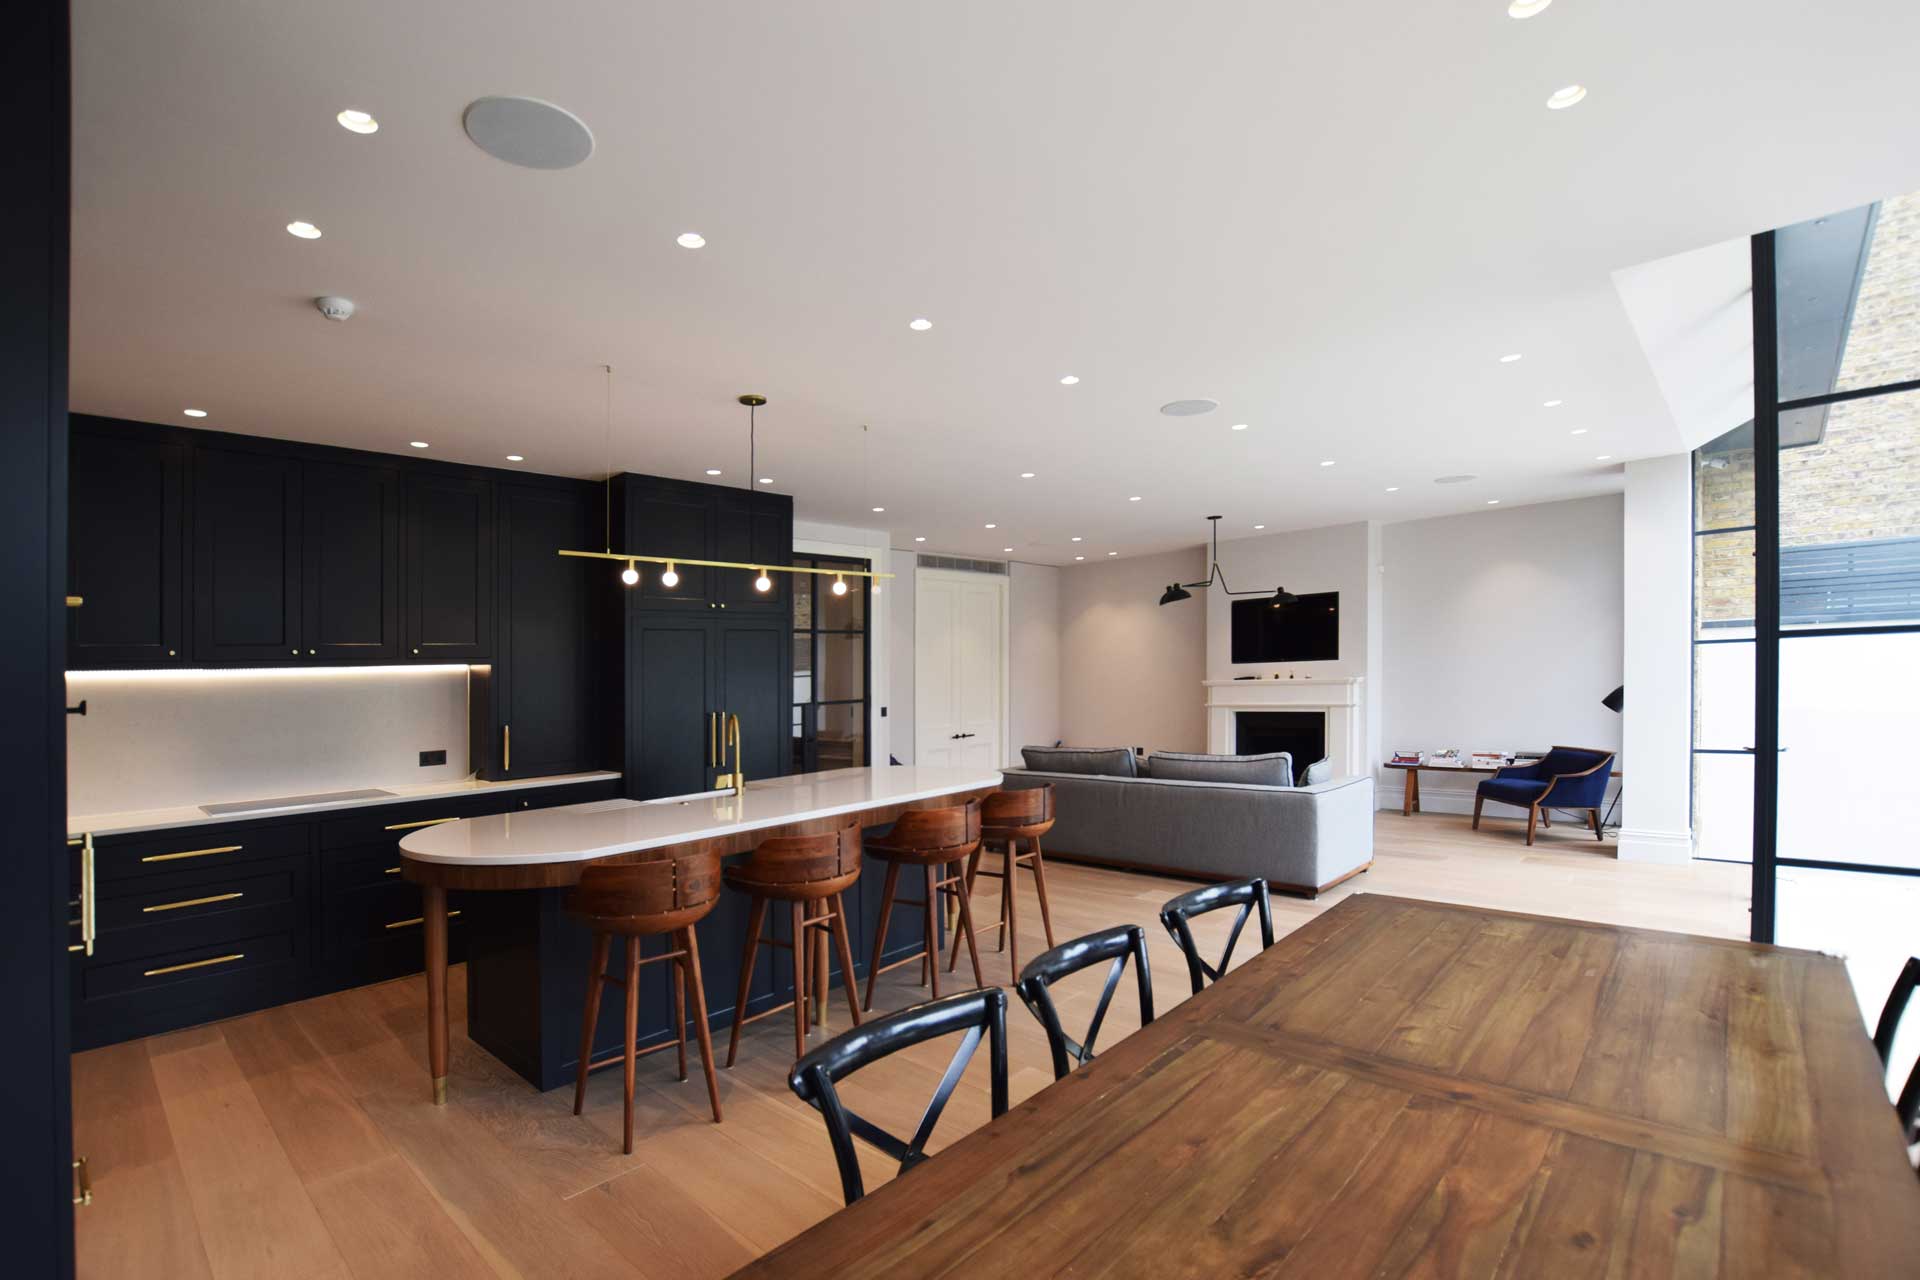 Clapham Common Westside Wandsworth Whole House Refurbishment, Extension And New Basement 09